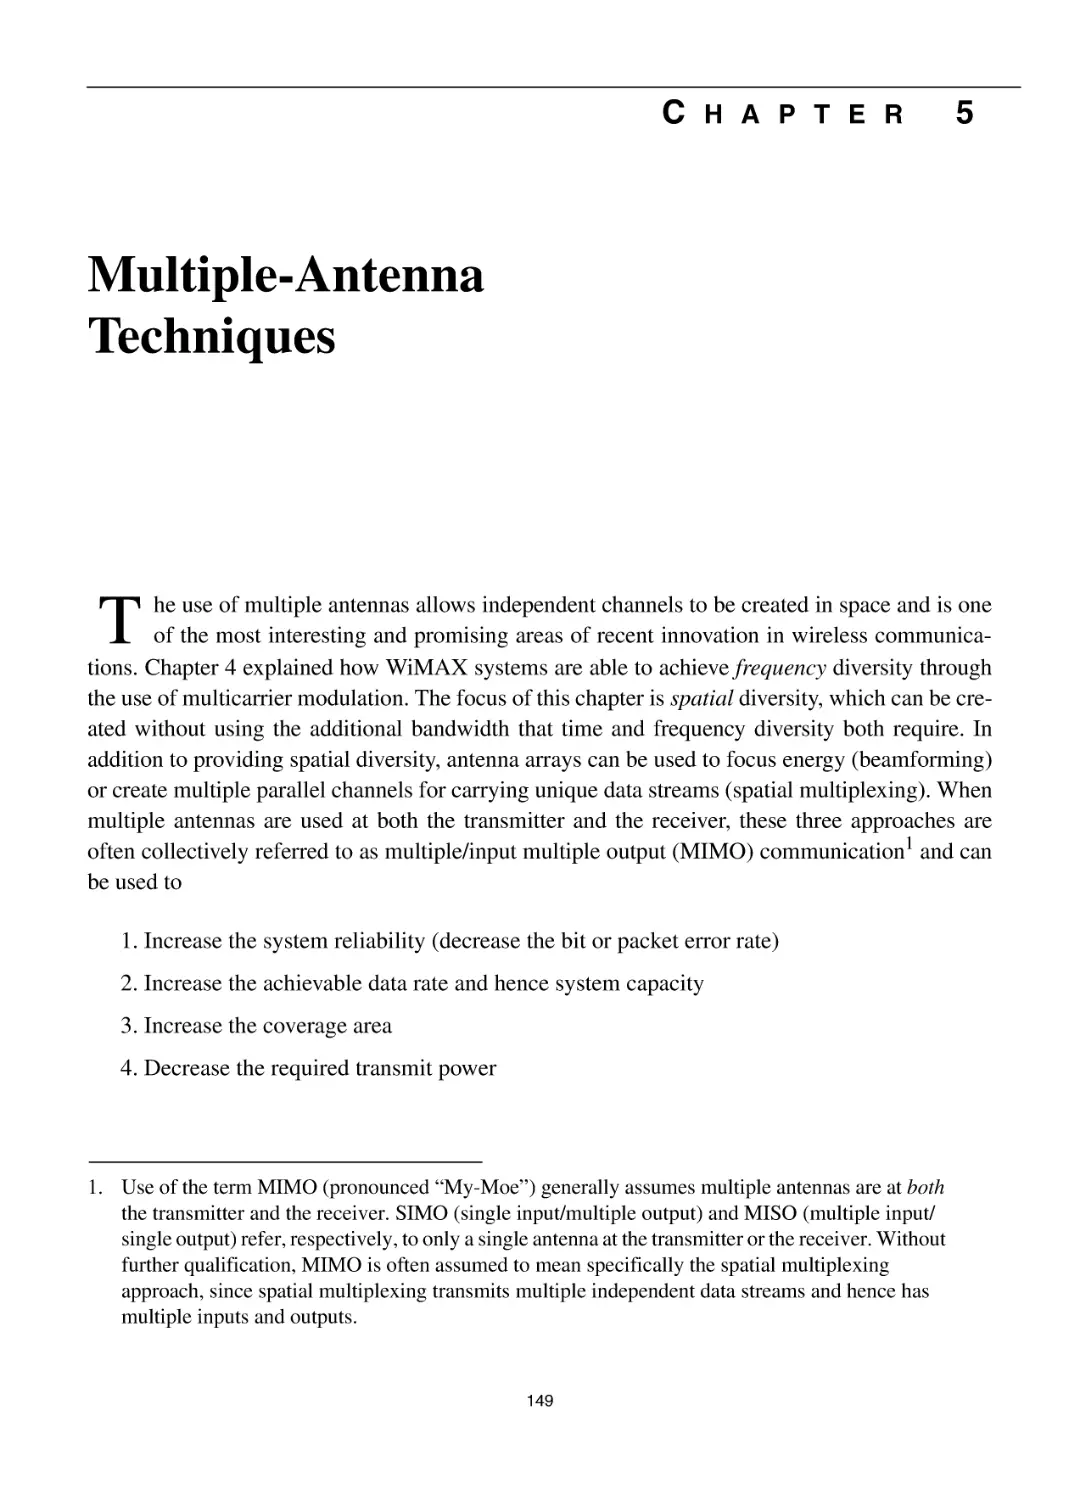 Chapter 5 Multiple-Antenna Techniques